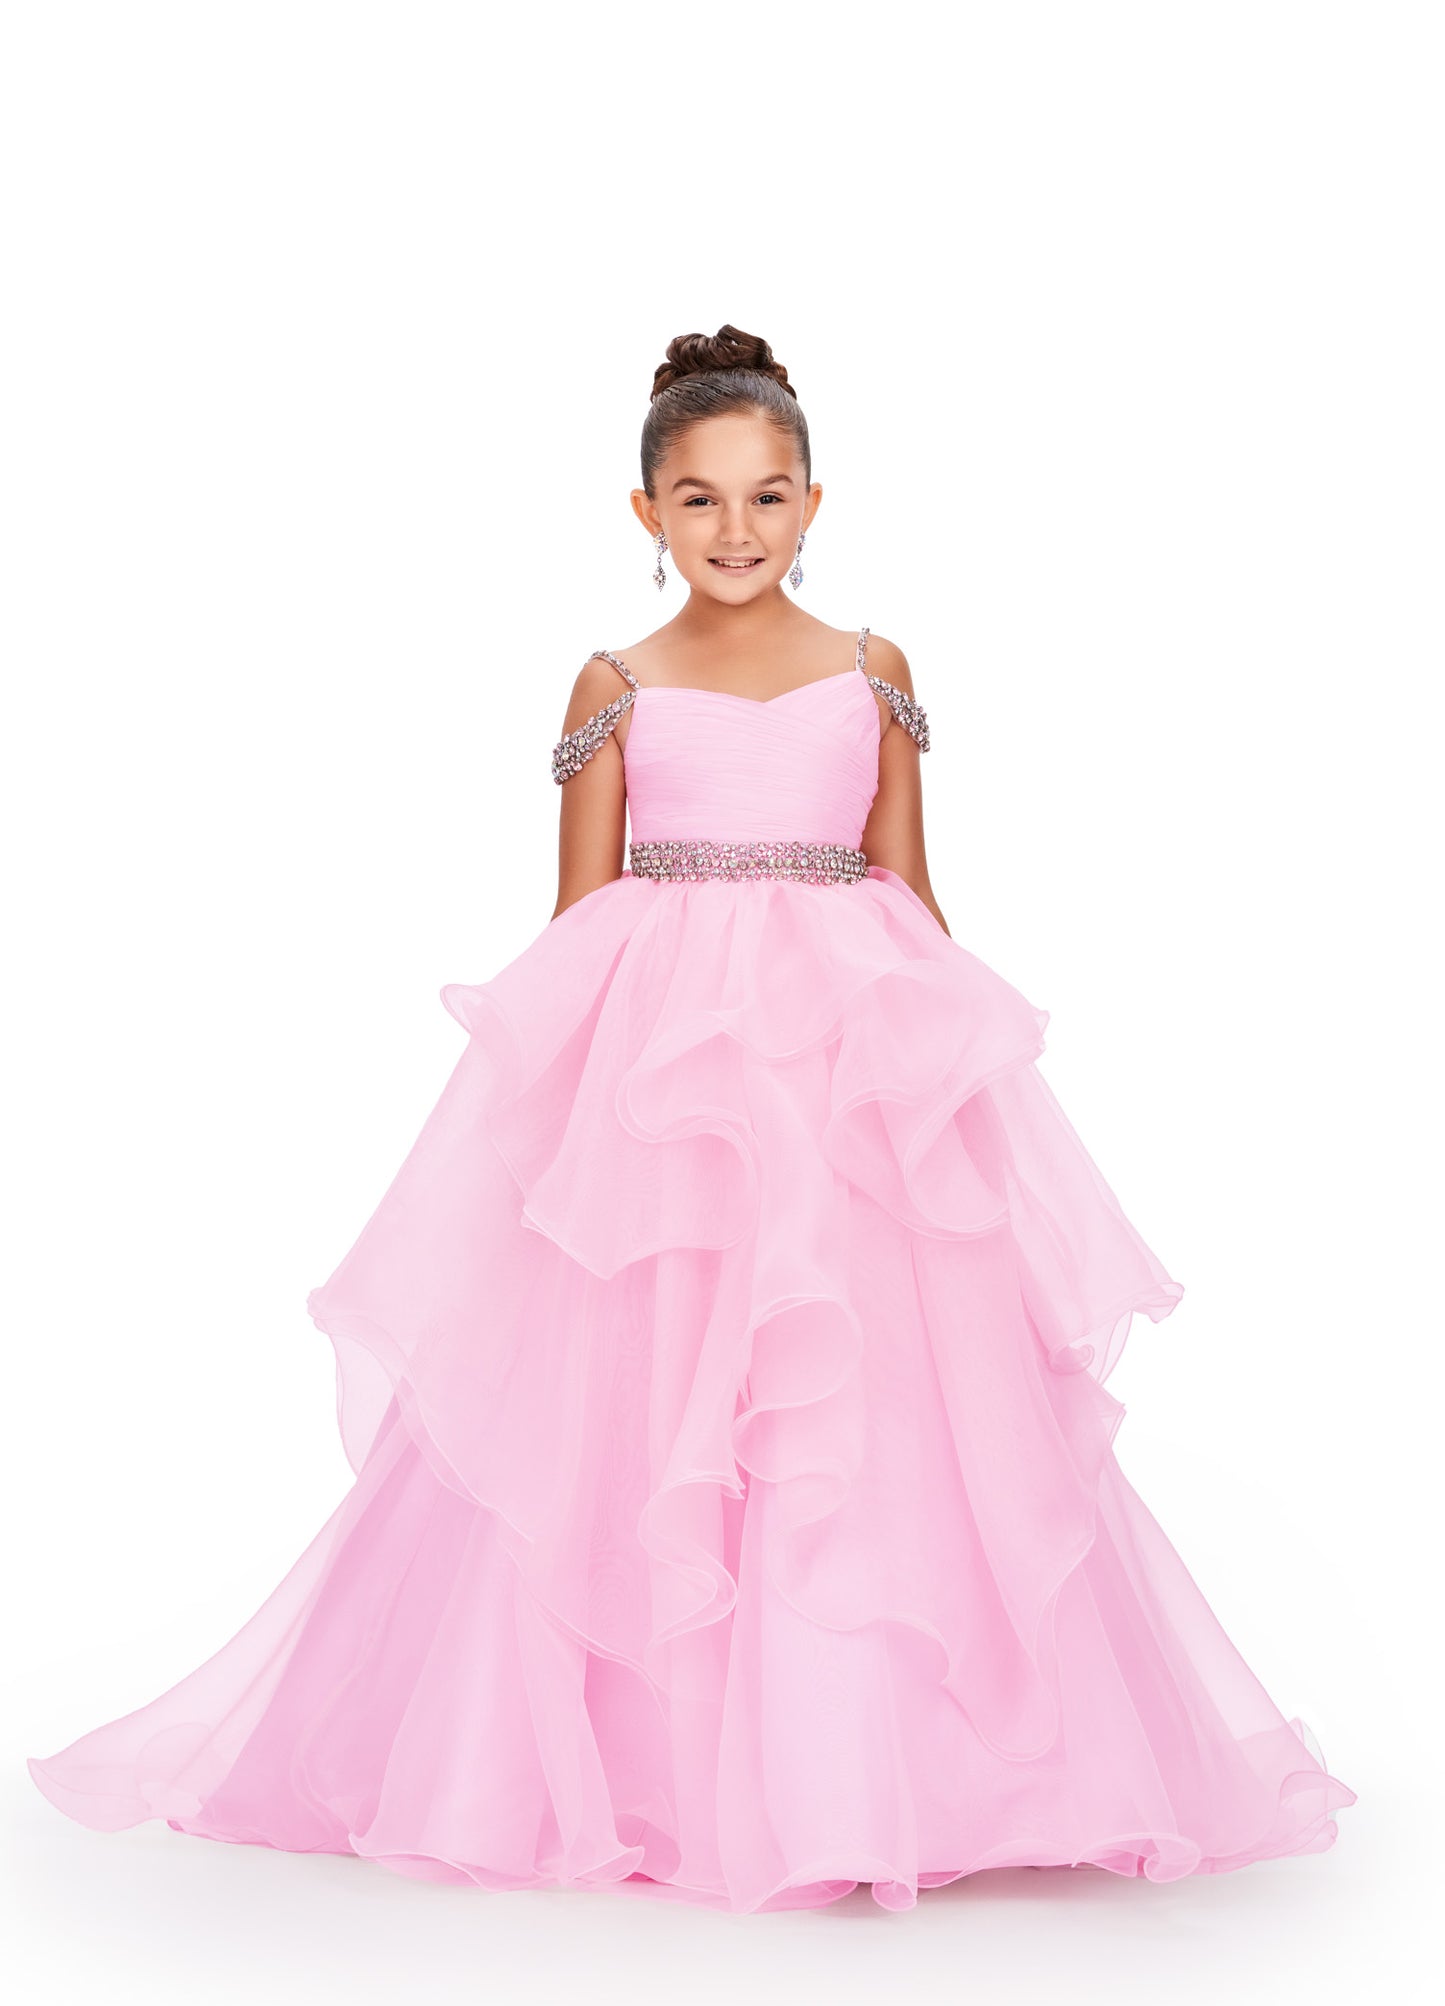 Glam up your little one's pageant look with the Ashley Lauren Kids 8250 A Line Ruffle Dress. This stunning ballgown features a delicate off-the-shoulder neckline, adorned with intricate beading. The ruffled A-line skirt adds a touch of elegance, making your child shine on stage. Perfect for any formal occasion. 